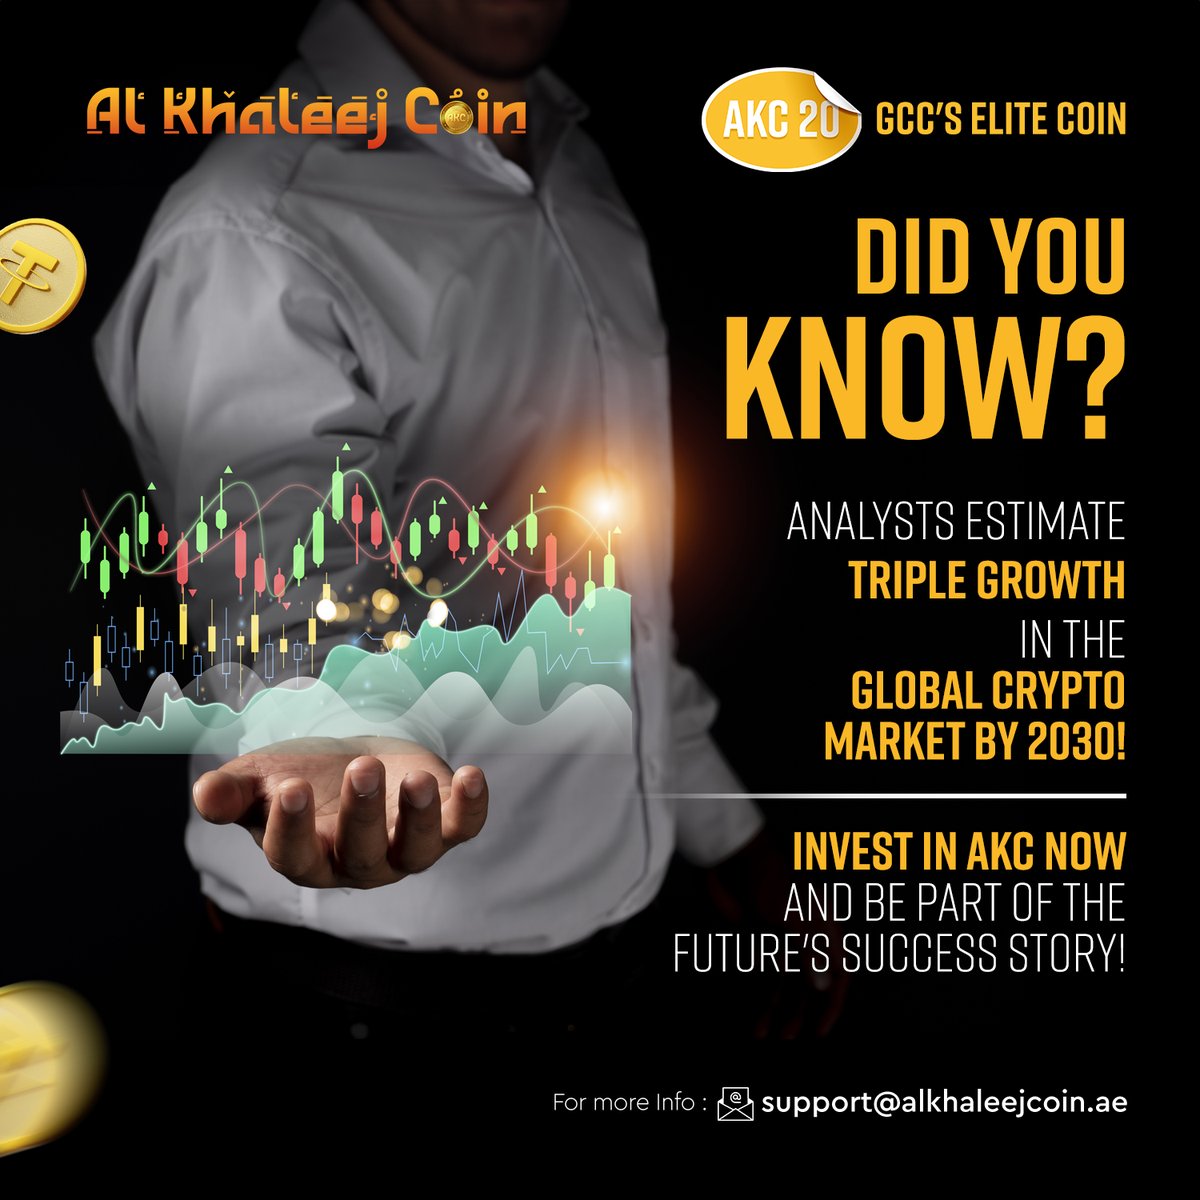 📈 Analysts foresee explosive growth in the global #cryptocurrency market by 2030! 💥 Don't miss out on the opportunity – invest in AKC now and secure your financial future! 💰 #CryptoBoom #InvestInAKC #akc #alkhaleejcoin #gcccoin #elite